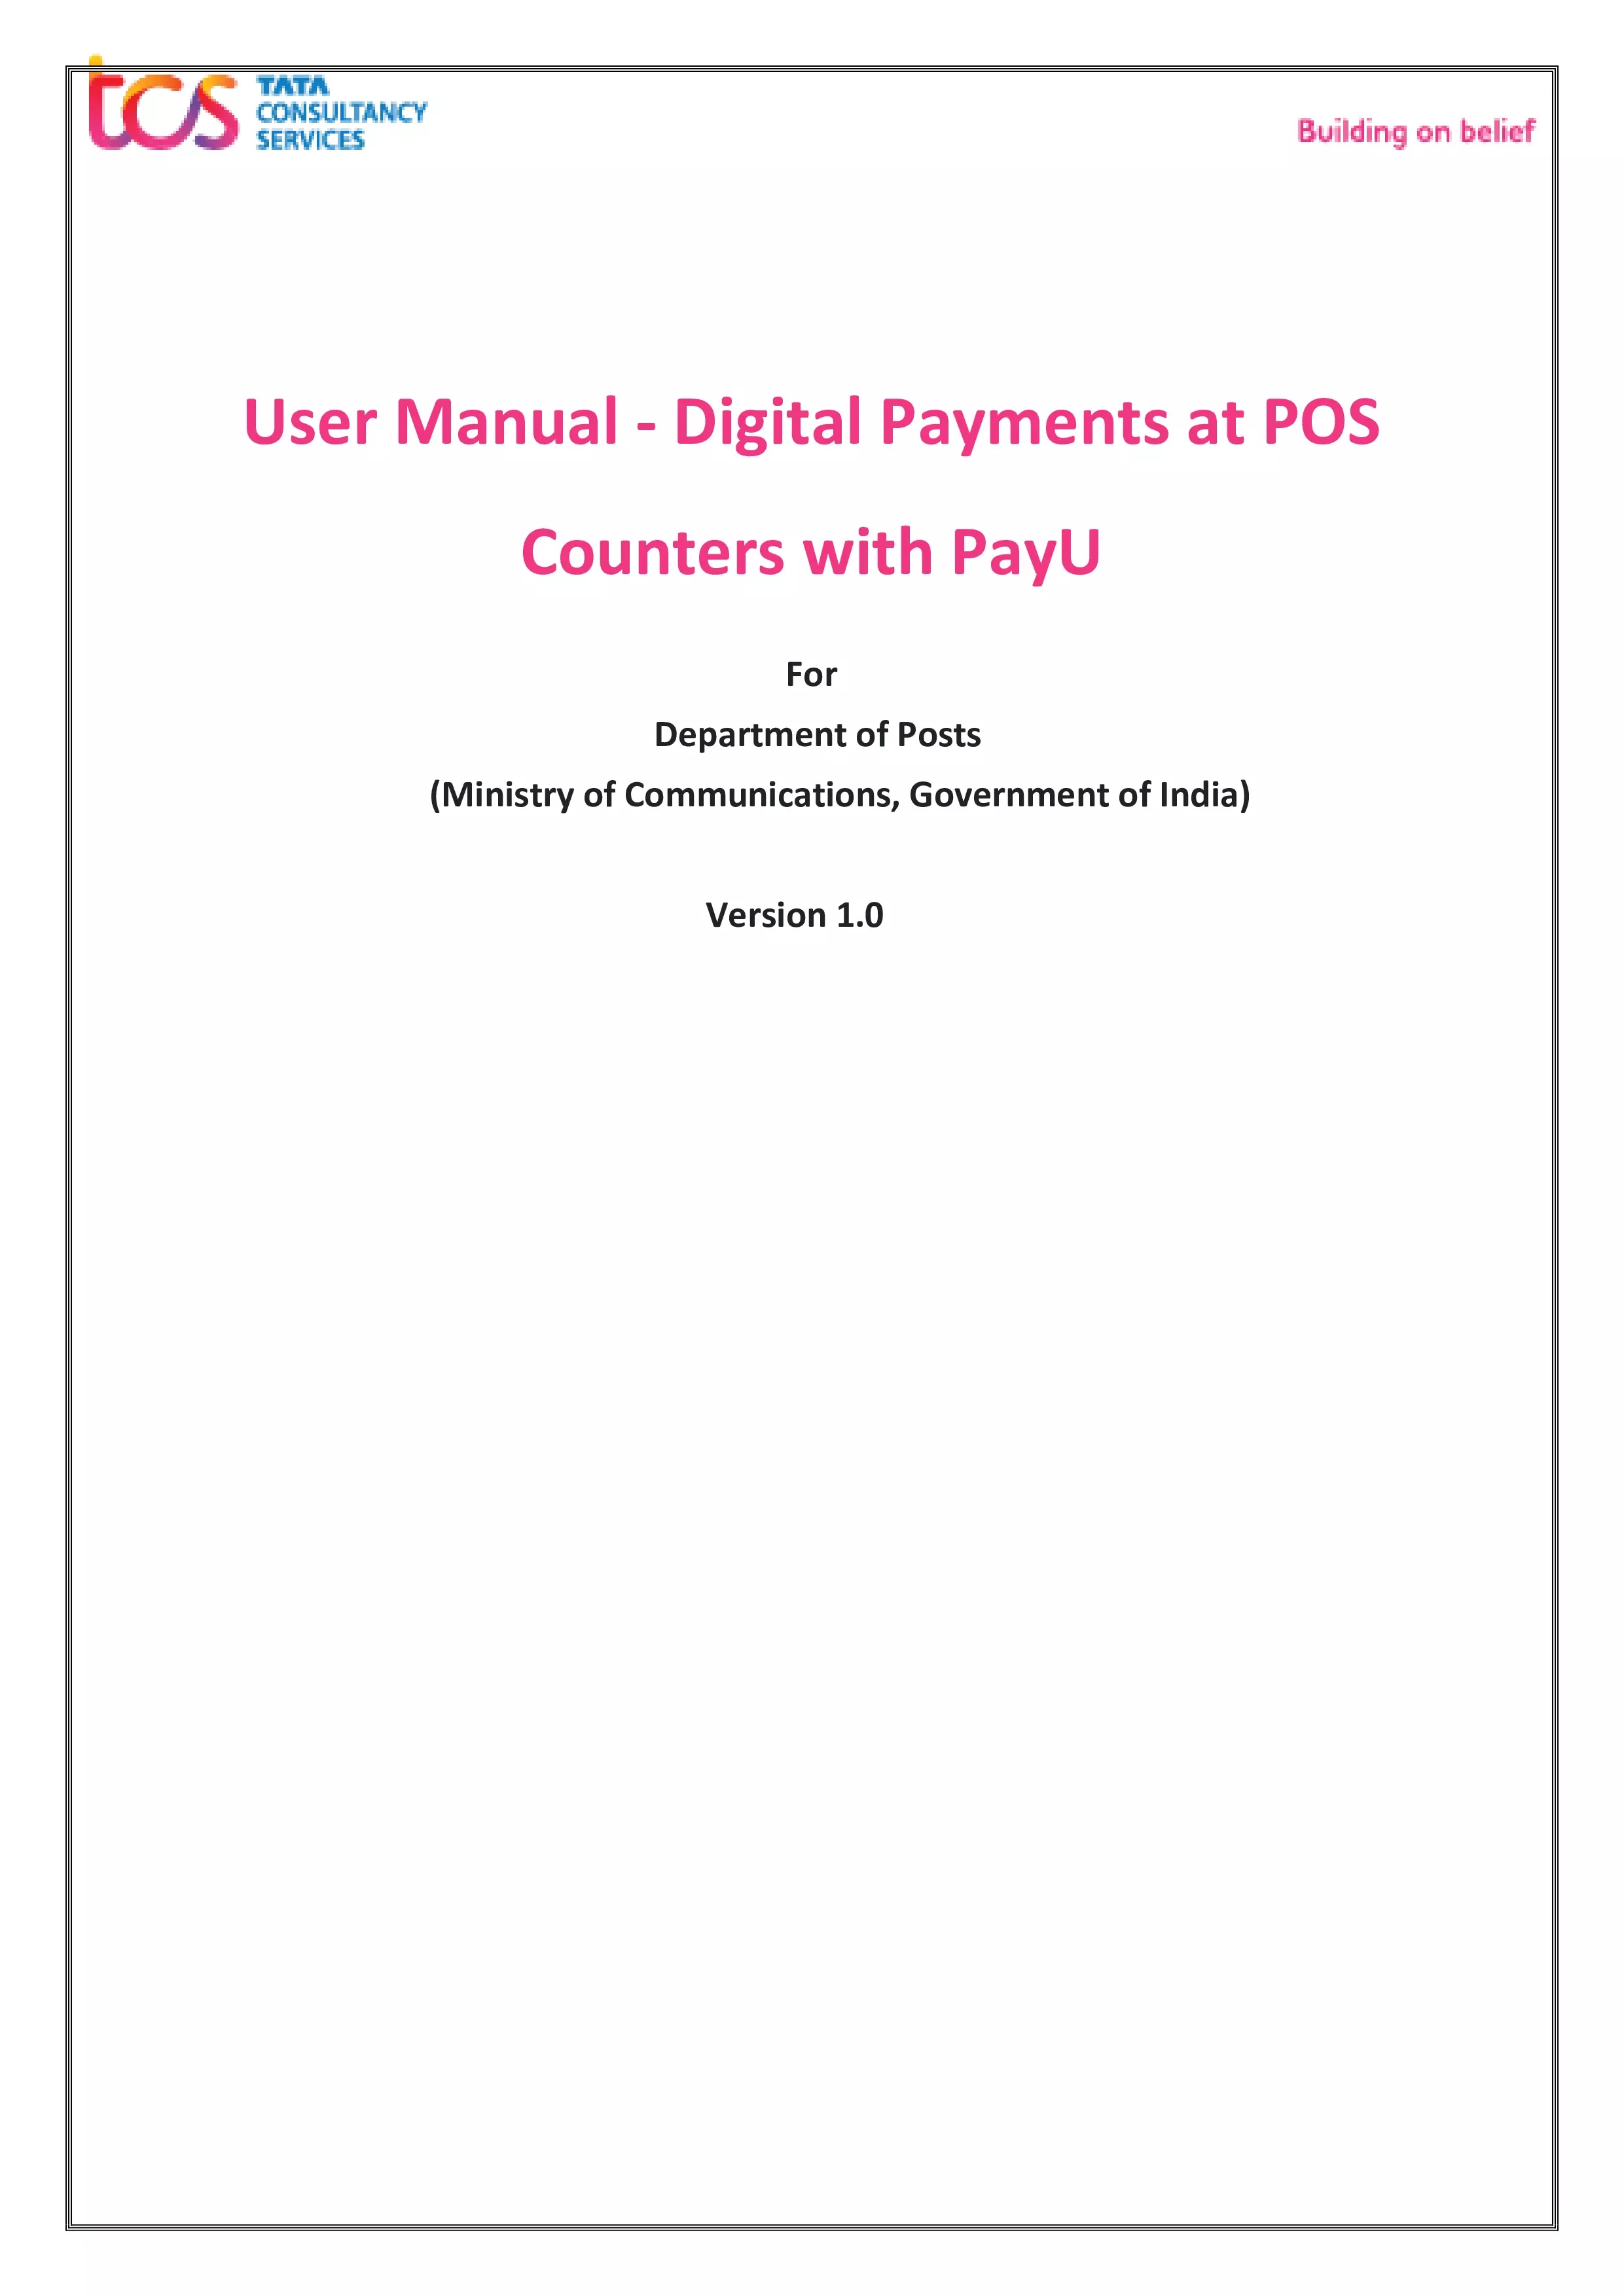 POS Counter User Manual for Digital Payments at Post Office with PayU  |  User Manual/SOP - Digital Payments at CSI POS Counters with PayU for Department of Posts (DOP). 